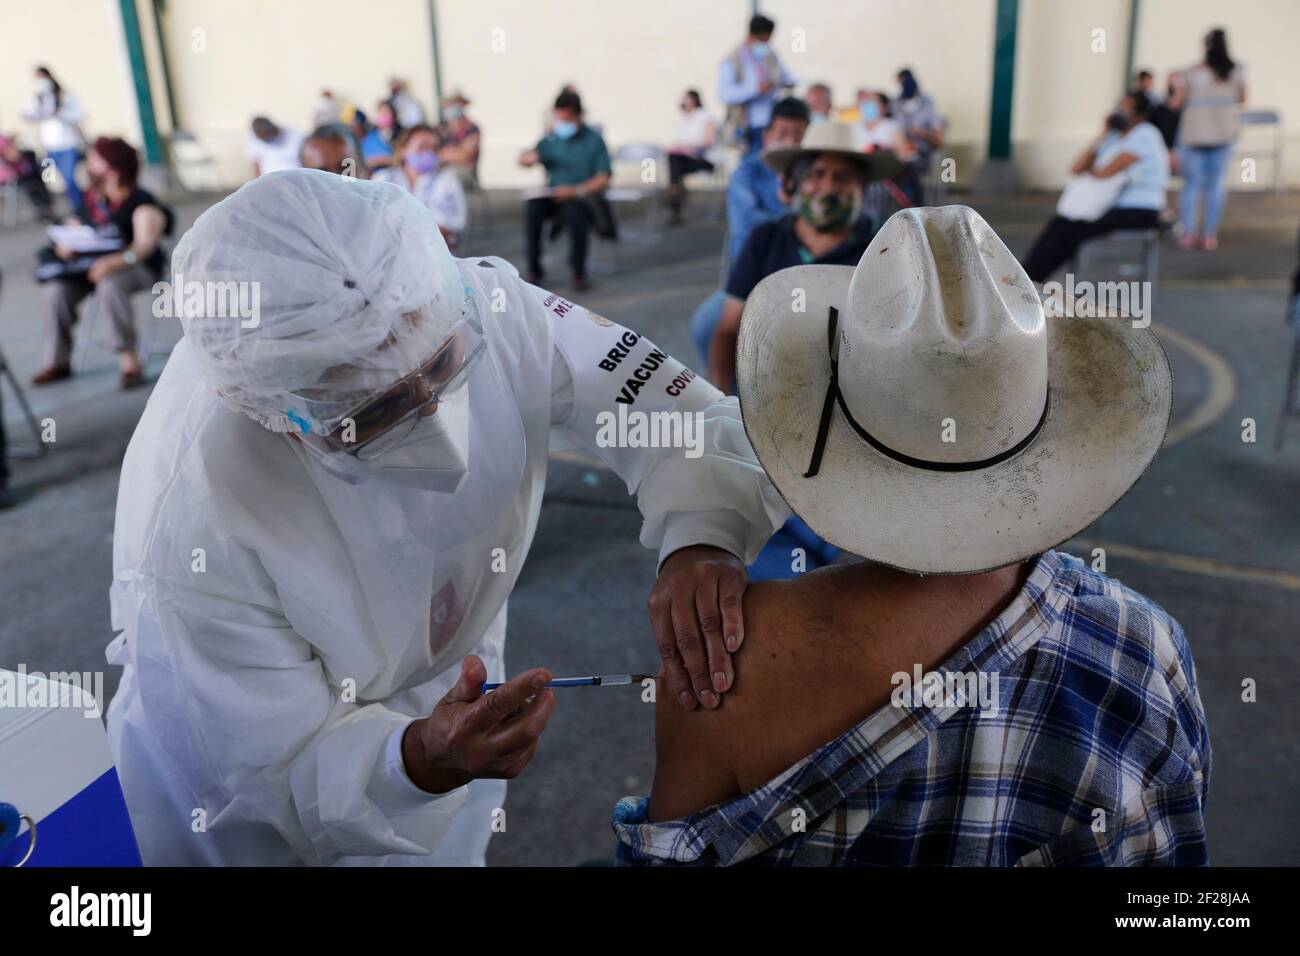 Uruapan, Michoacan, Mexico. 10th Mar, 2021. A person receives a dose of Pfizer-BioNTech Covid-19 vaccine before inject to an elderly, during mass vaccine inside of Hermanos Lopez Rayon sports center, a designated priority vaccination center for elderly over 60 years in the Uruapan town. On March 10, 2021 in Michoacan, Mexico. Credit: Carlos Guzman/eyepix/ZUMA Wire/Alamy Live News Stock Photo